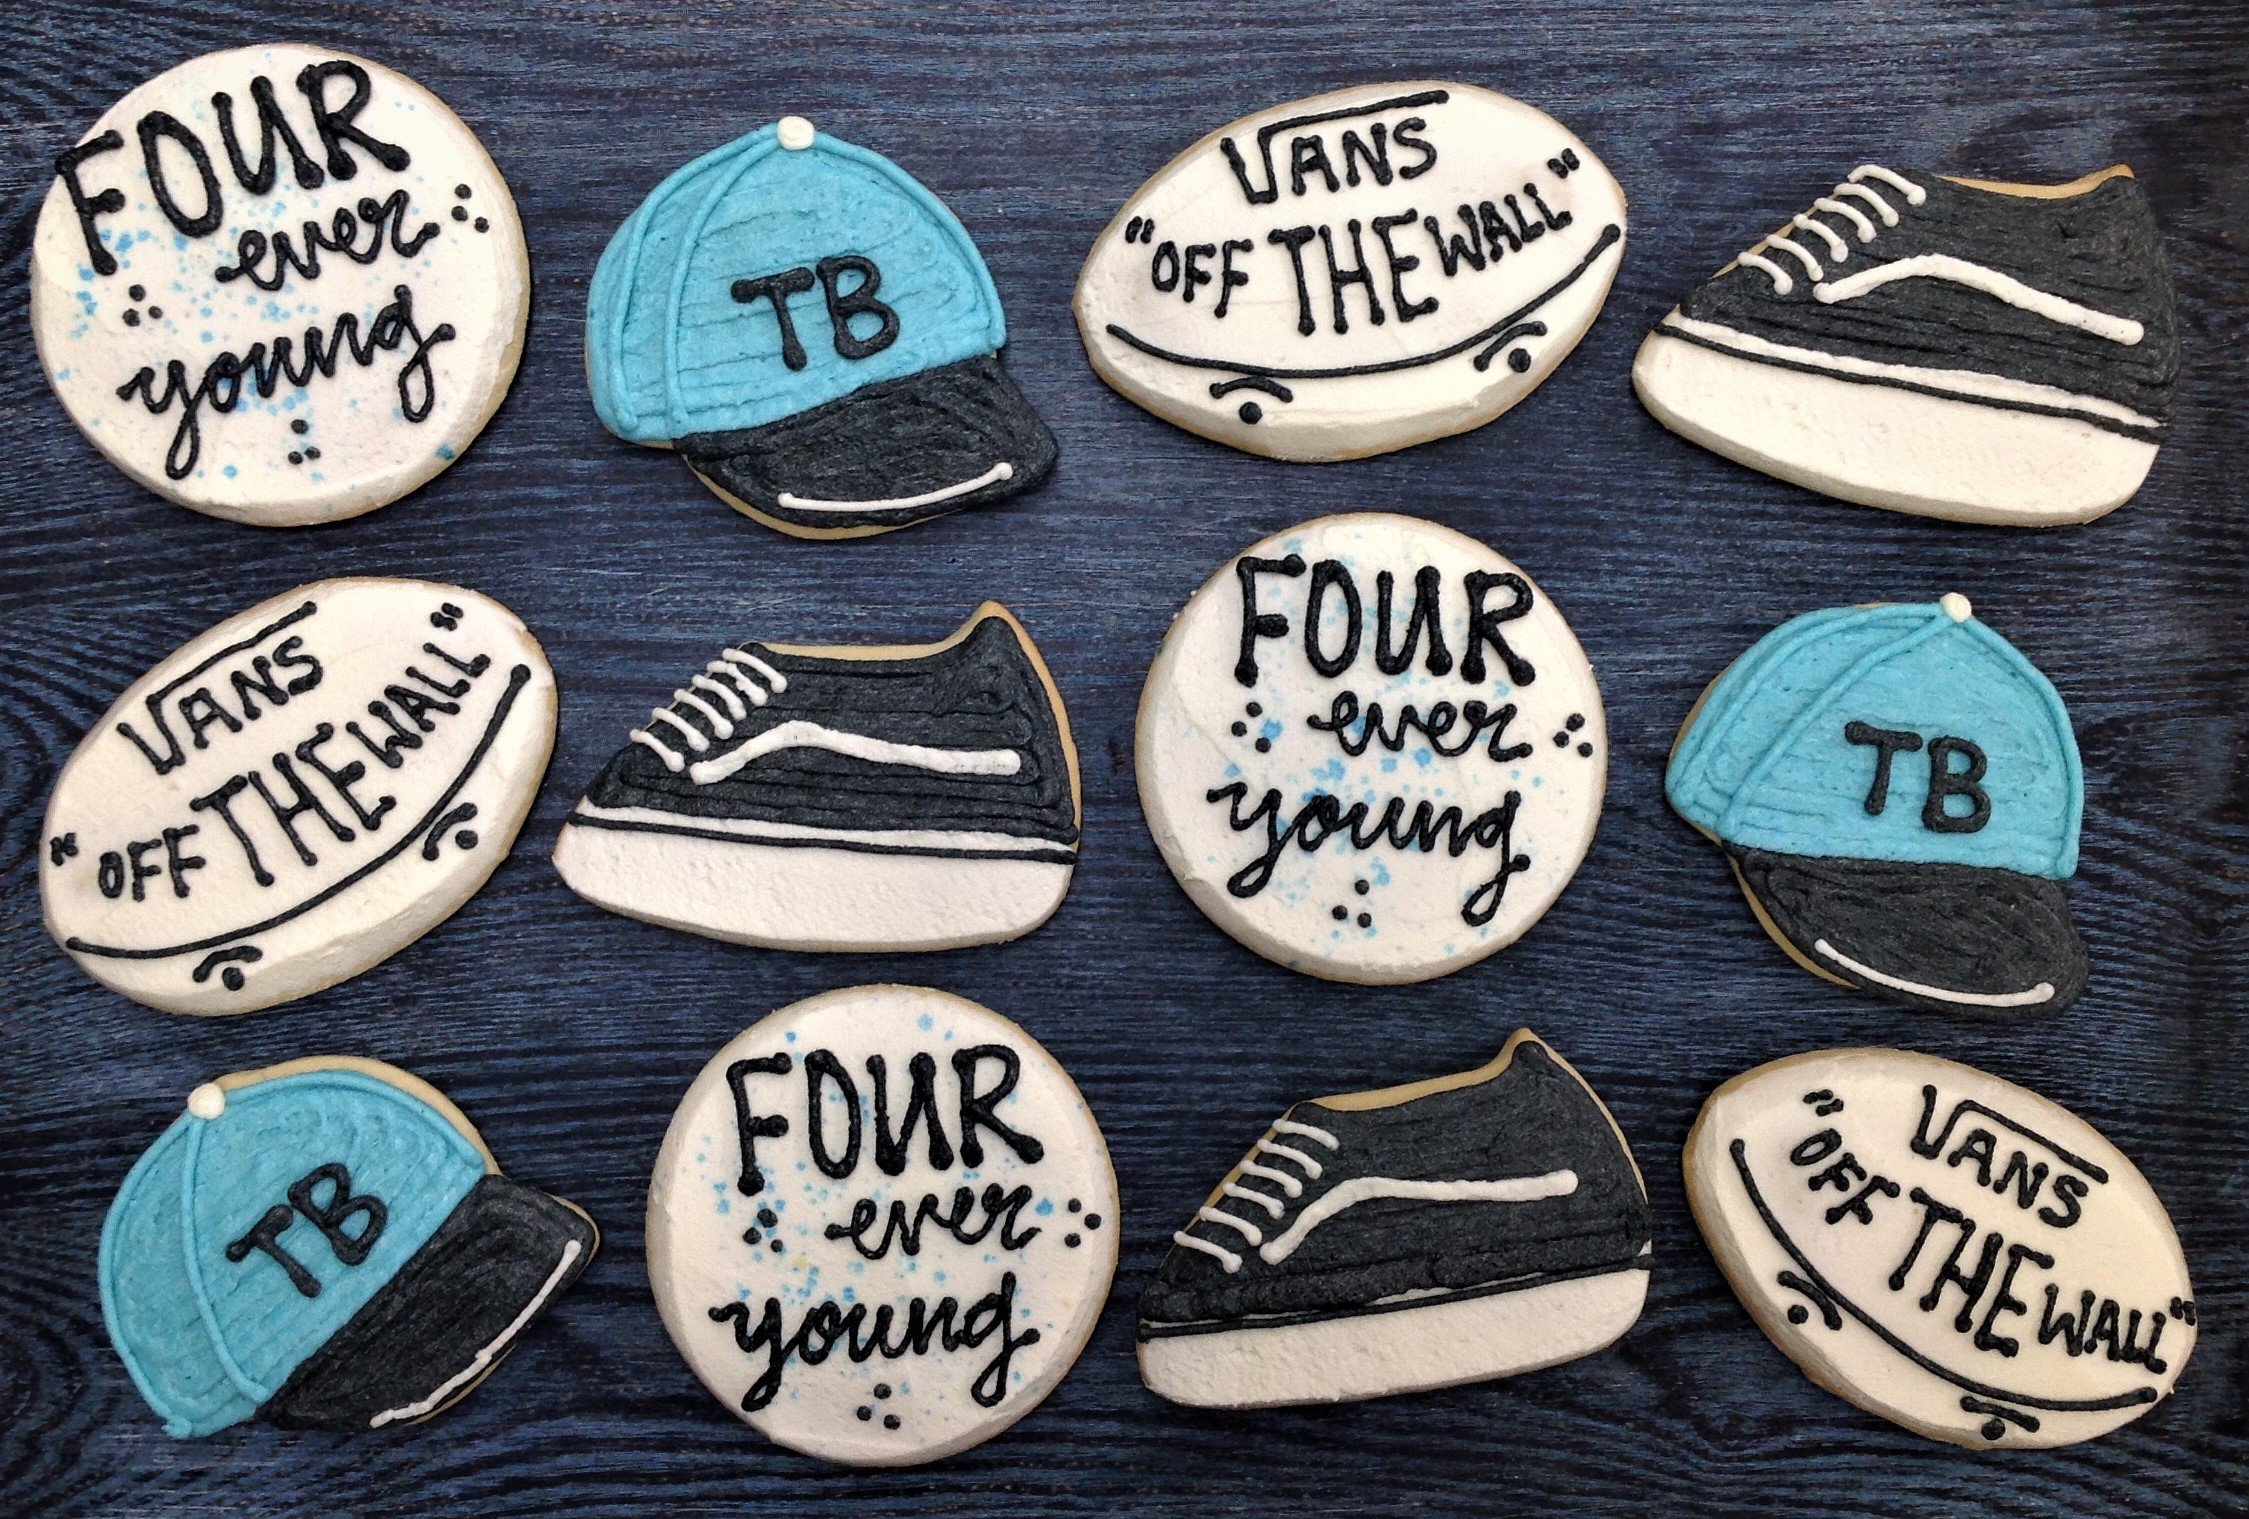 FOUR ever young-Vans Birthday.JPG